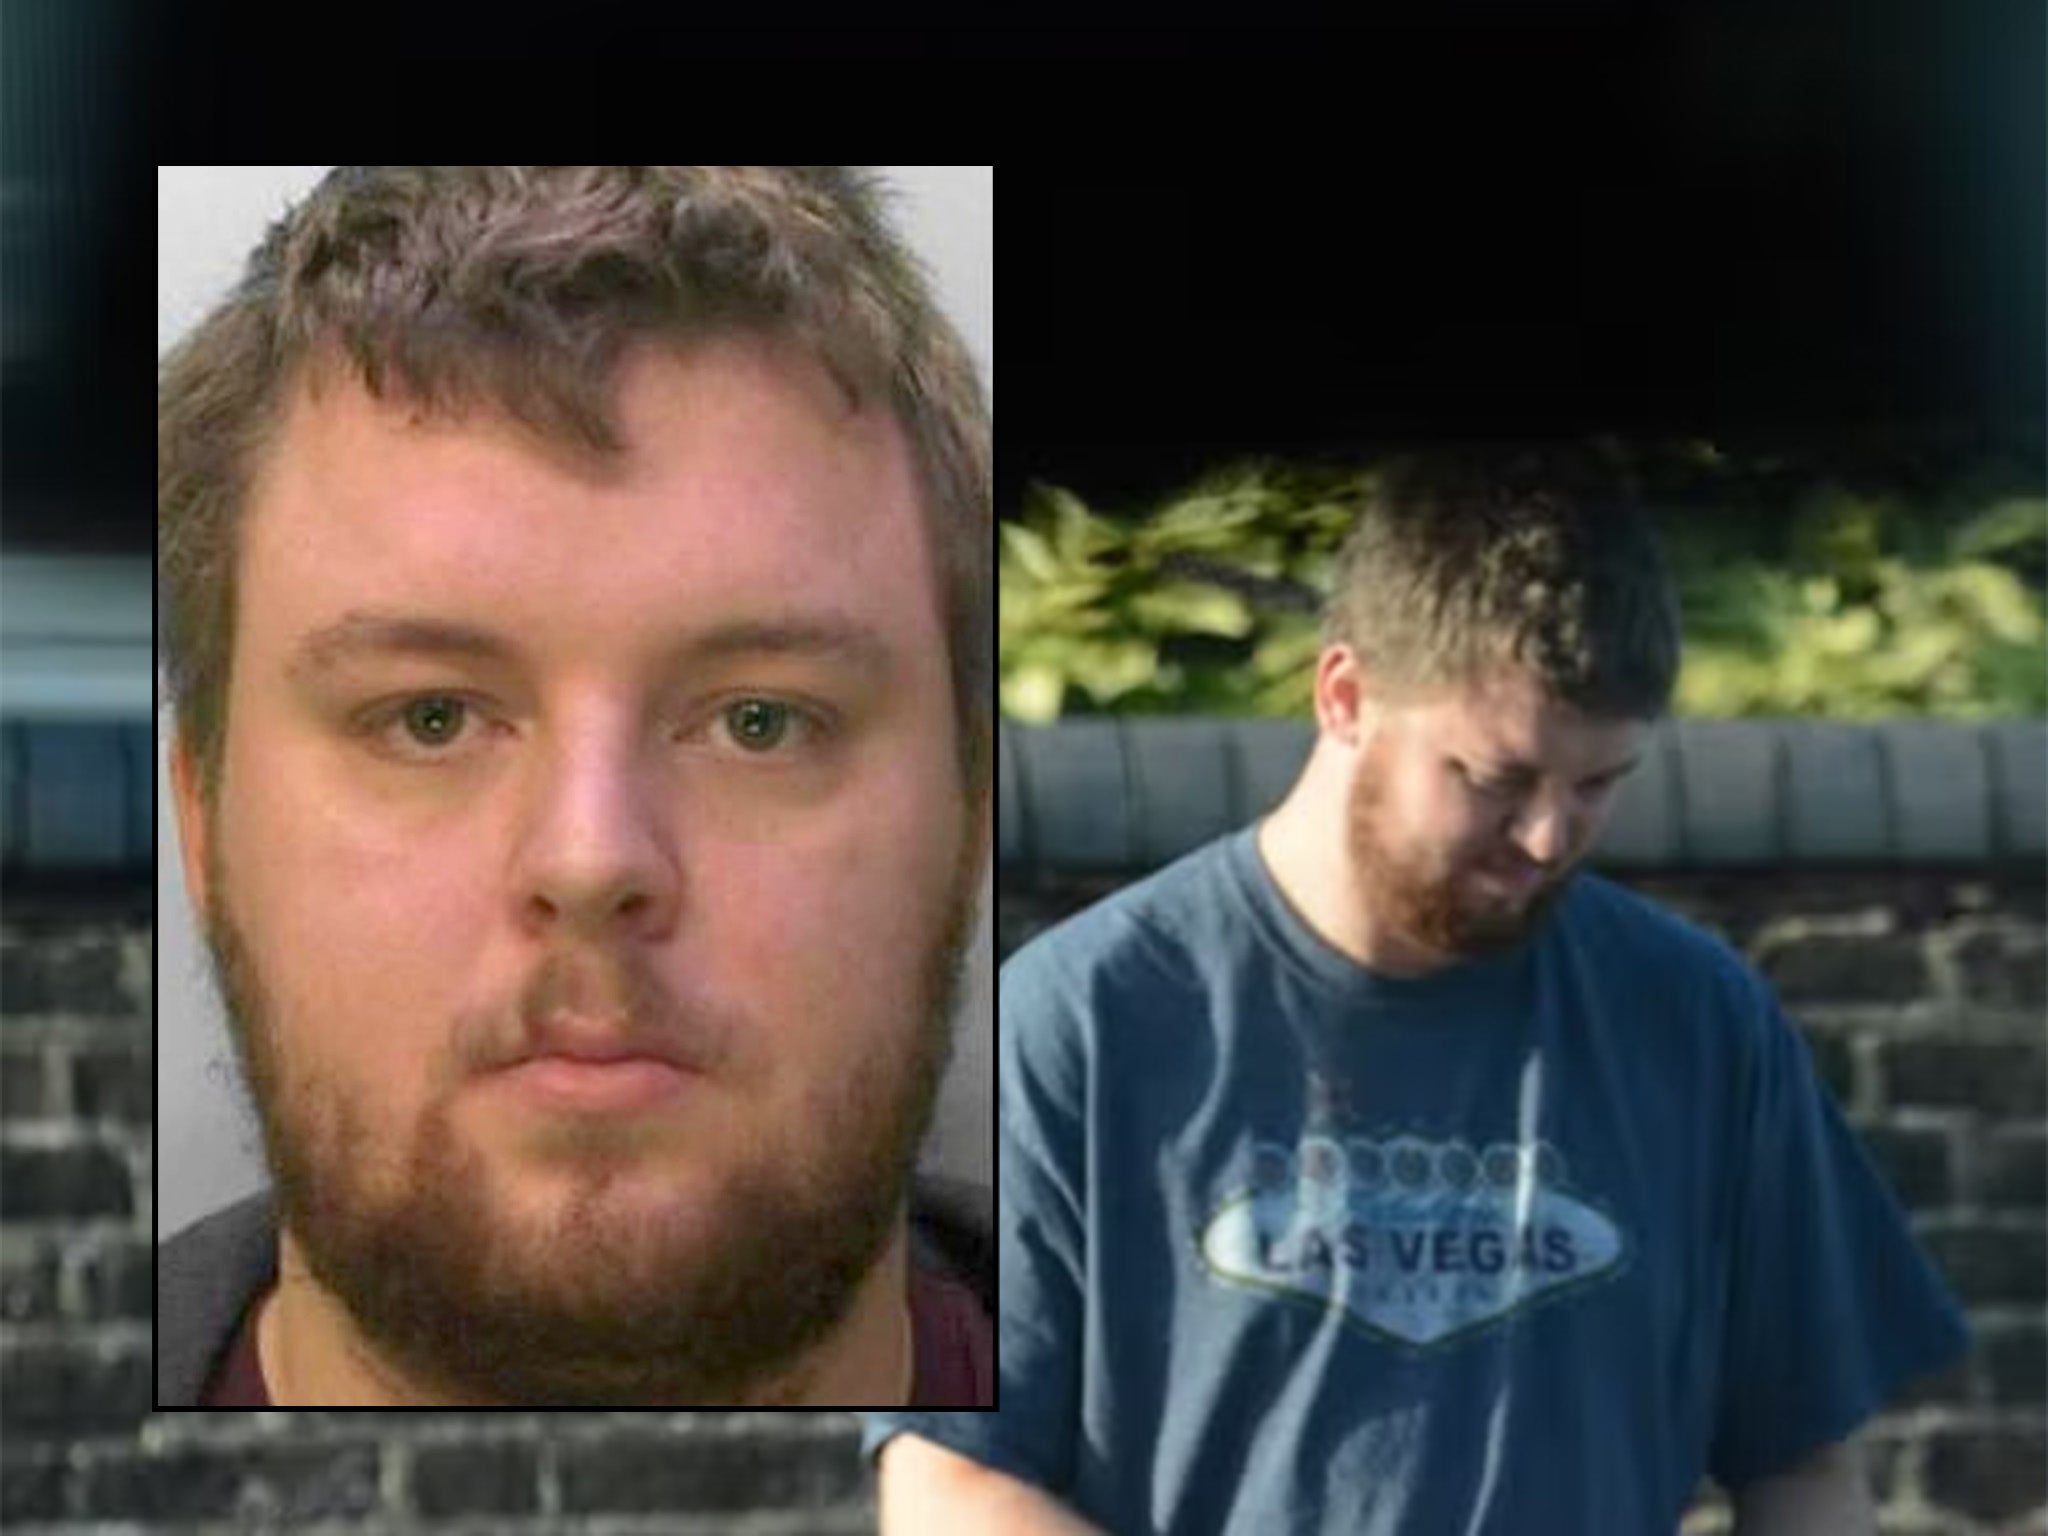 Jordan Croft, pictured here in a mugshot and in police surveillance footage, made victims 'submit to his depraved demands’ a judge said